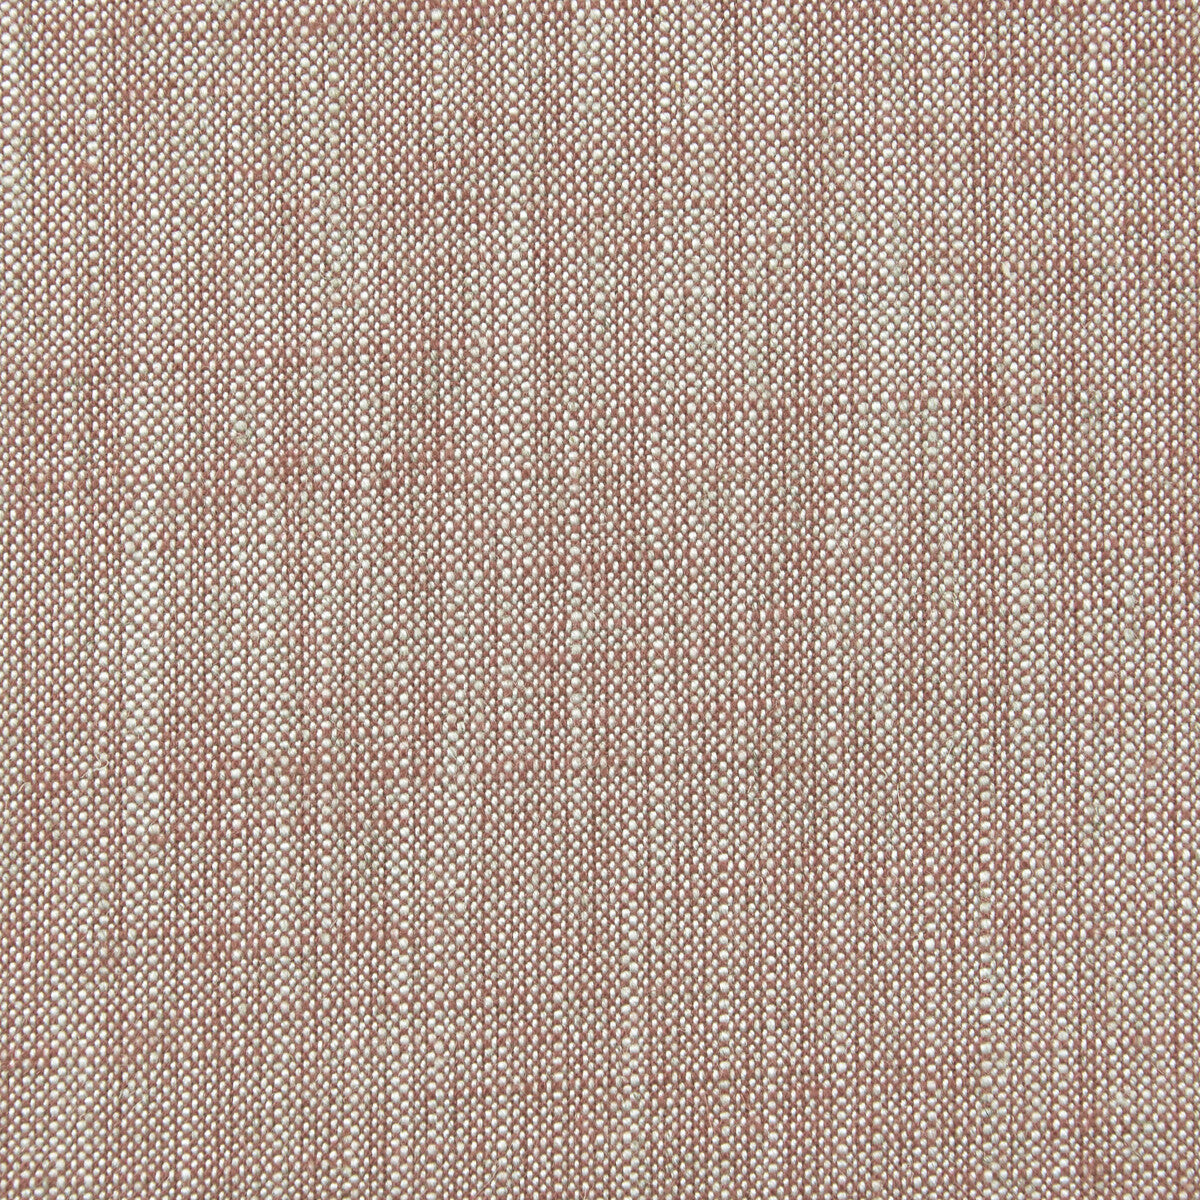 Biarritz fabric in geranium color - pattern F0965/17.CAC.0 - by Clarke And Clarke in the Clarke &amp; Clarke Biarritz collection